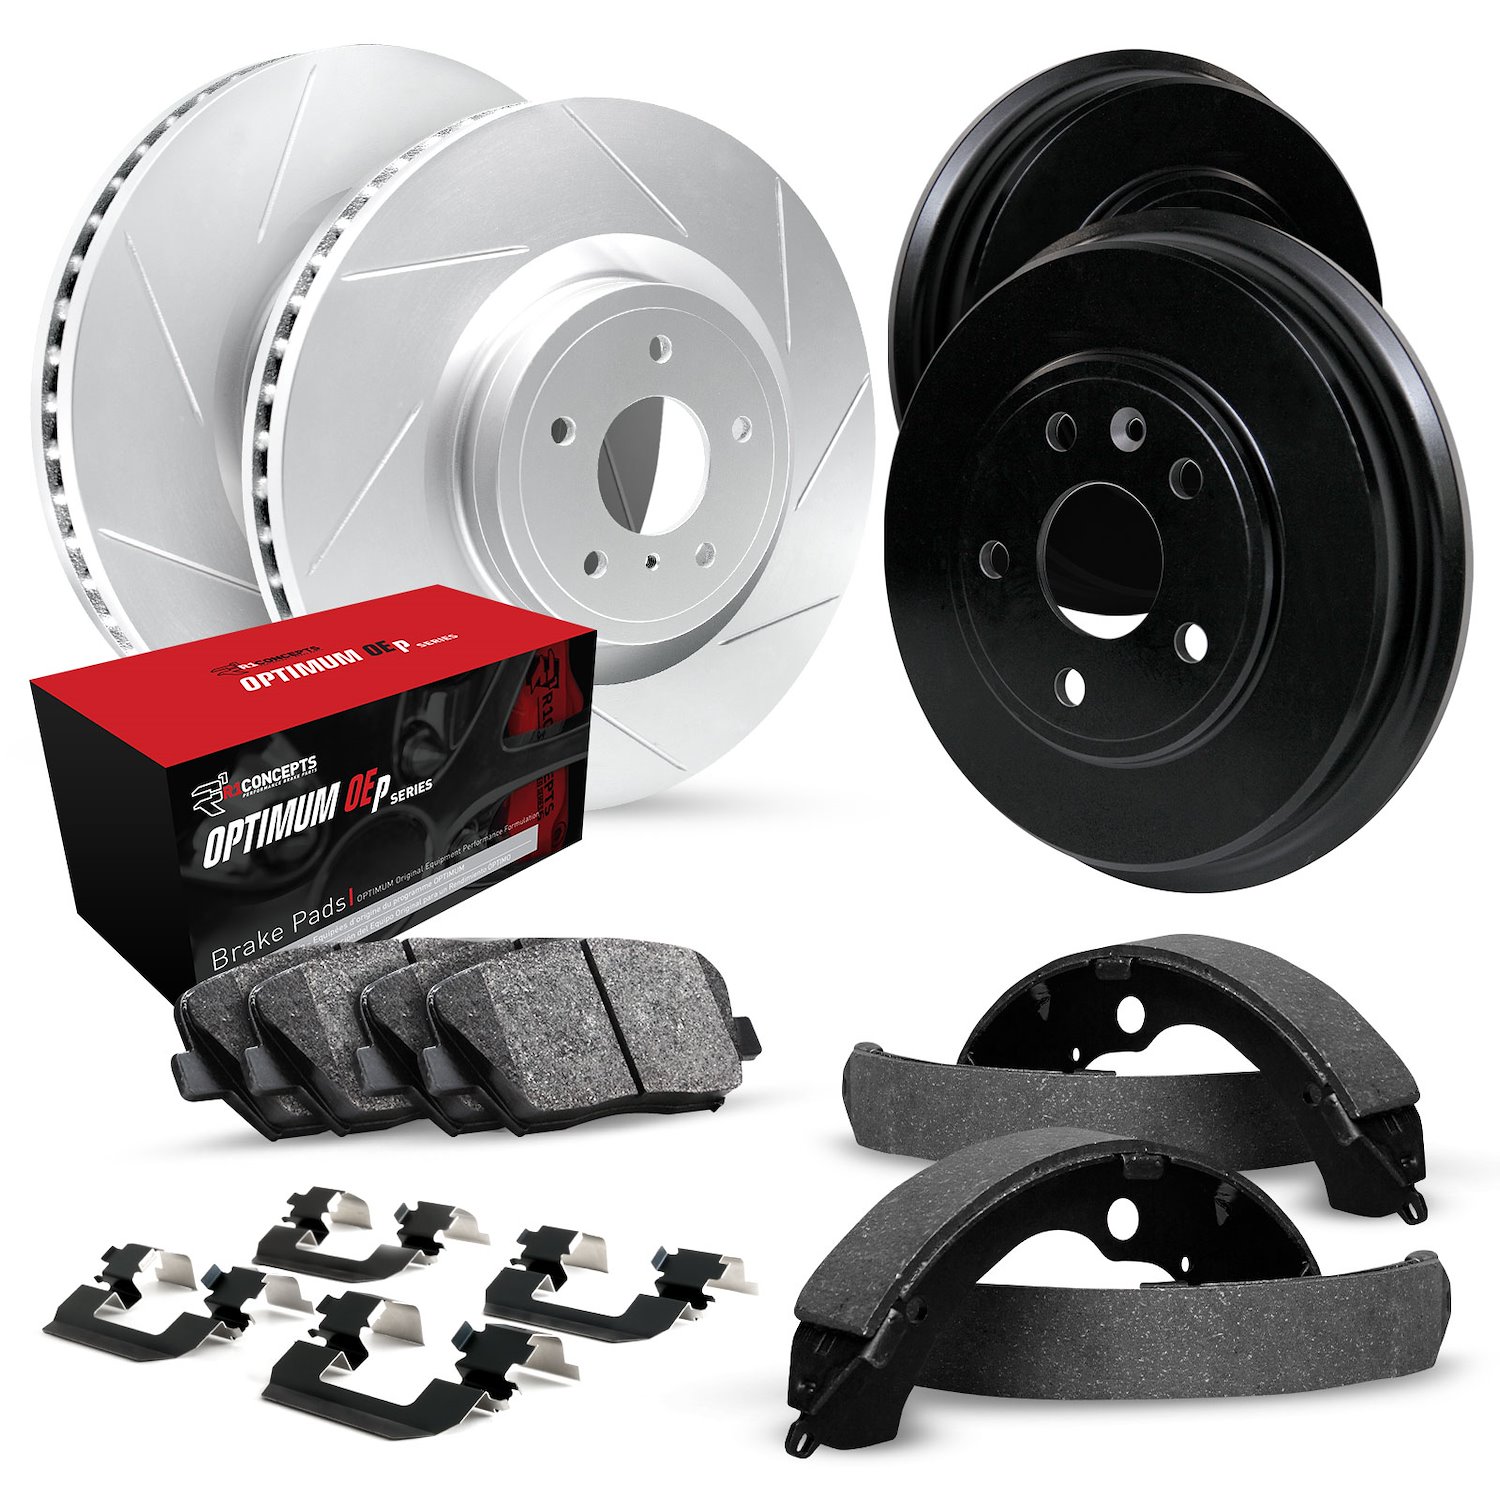 GEO-Carbon Slotted Brake Rotor & Drum Set w/Optimum OE Pads, Shoes, & Hardware, 2002-2005 Land Rover, Position: Front & Rear